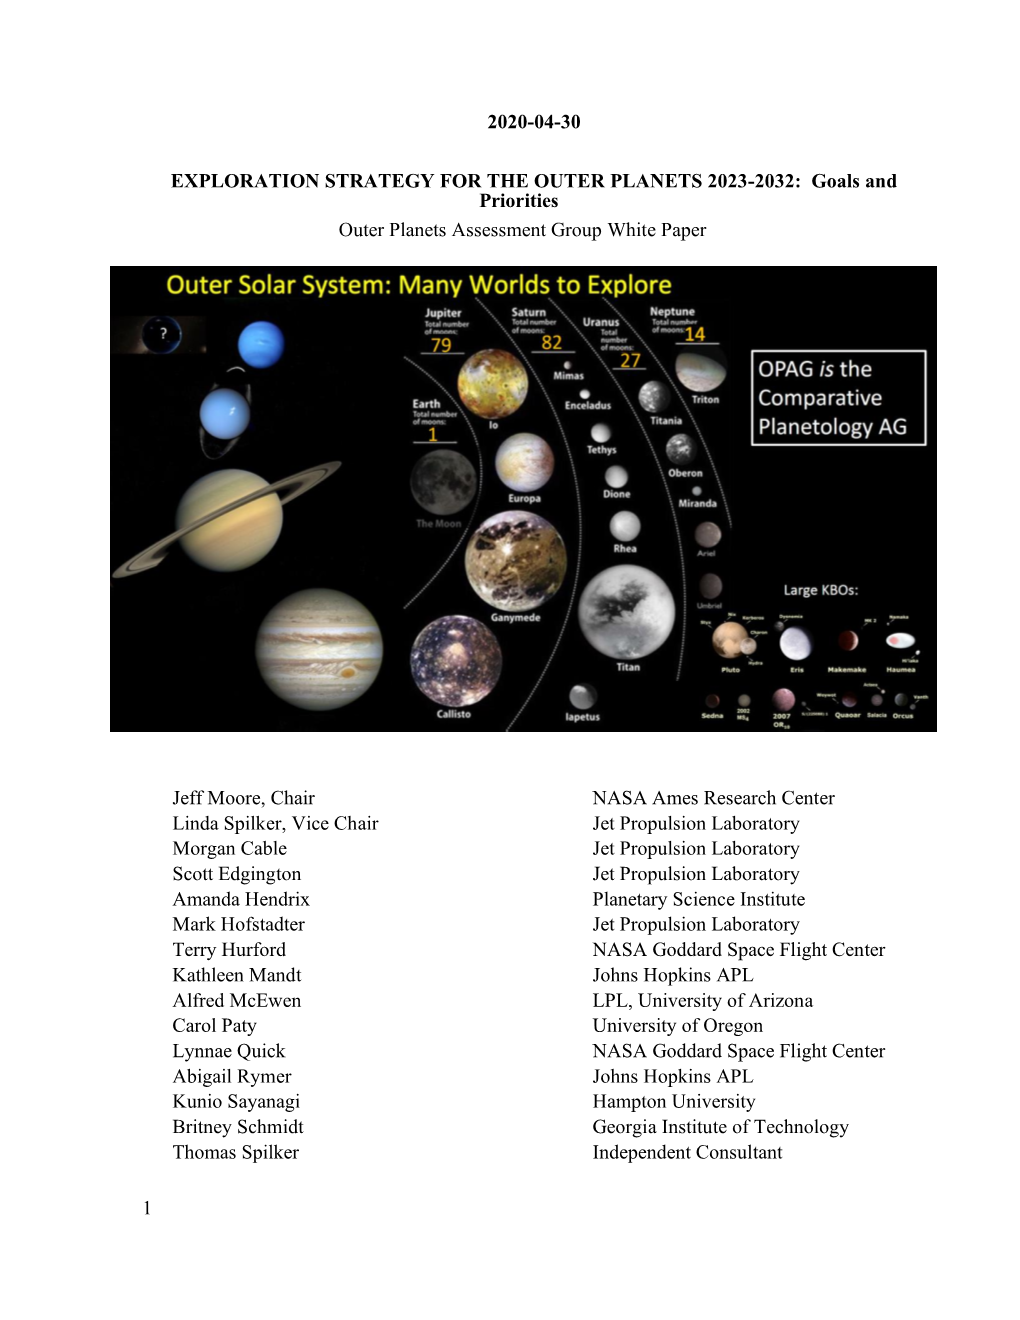 Goals and Priorities Outer Planets Assessment Group White Paper